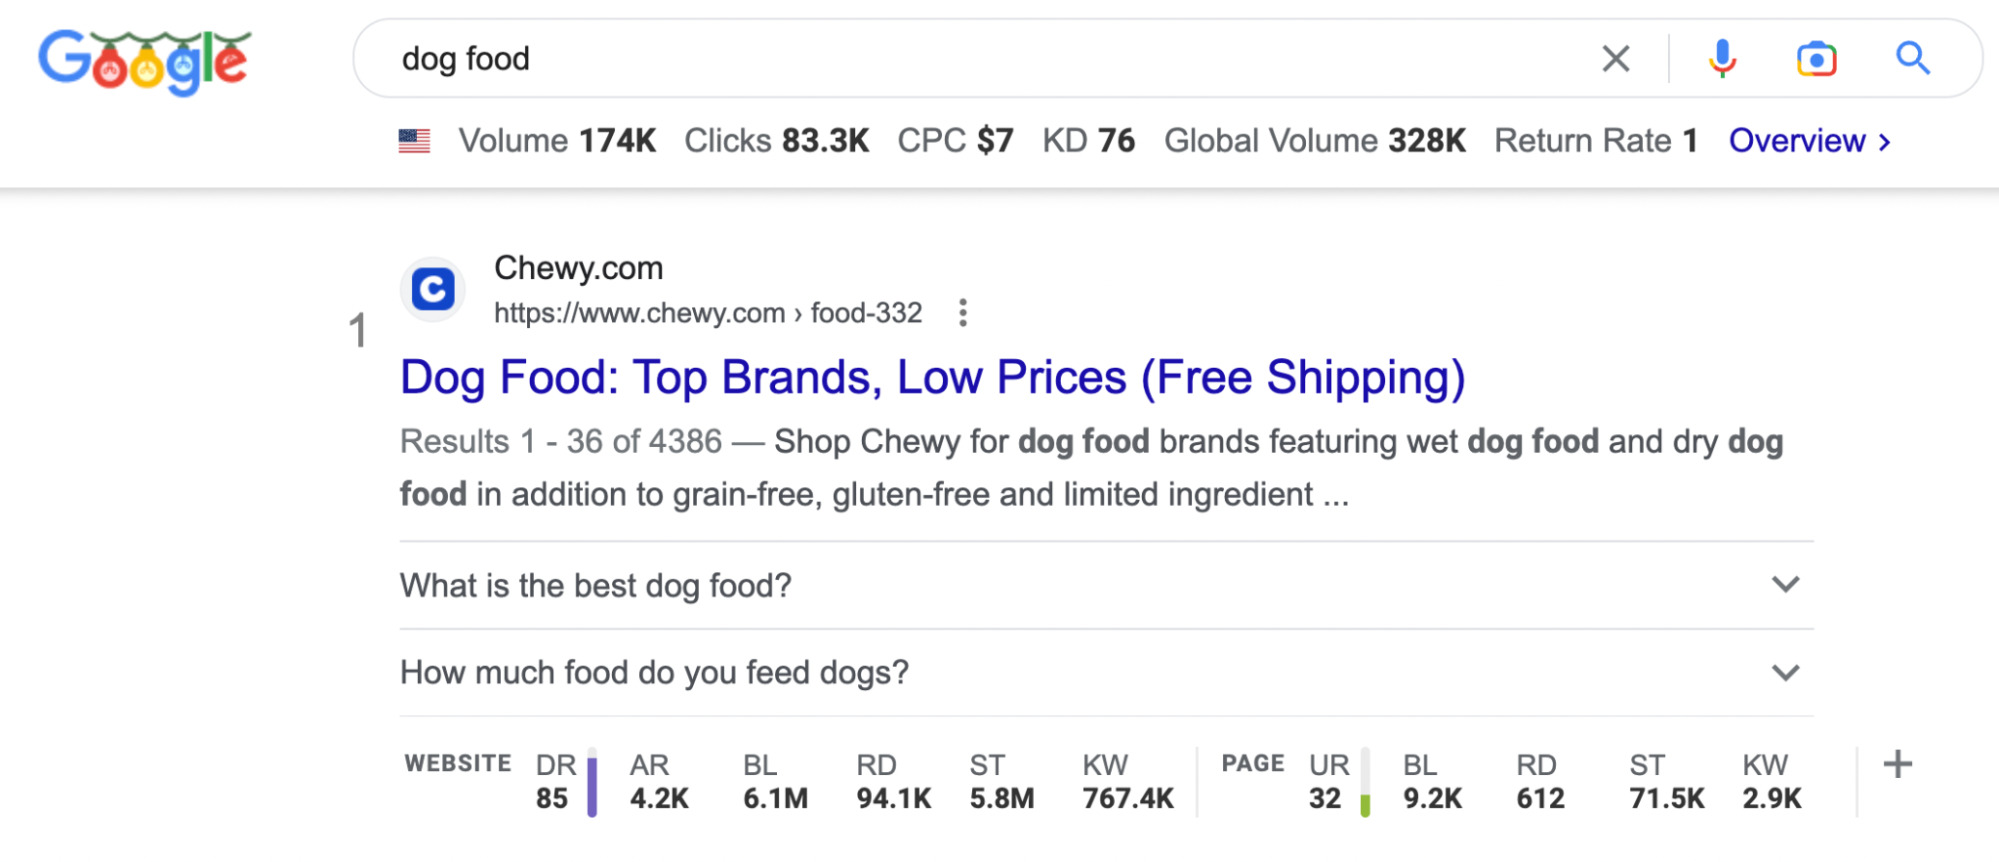 Google search results for "dog food"